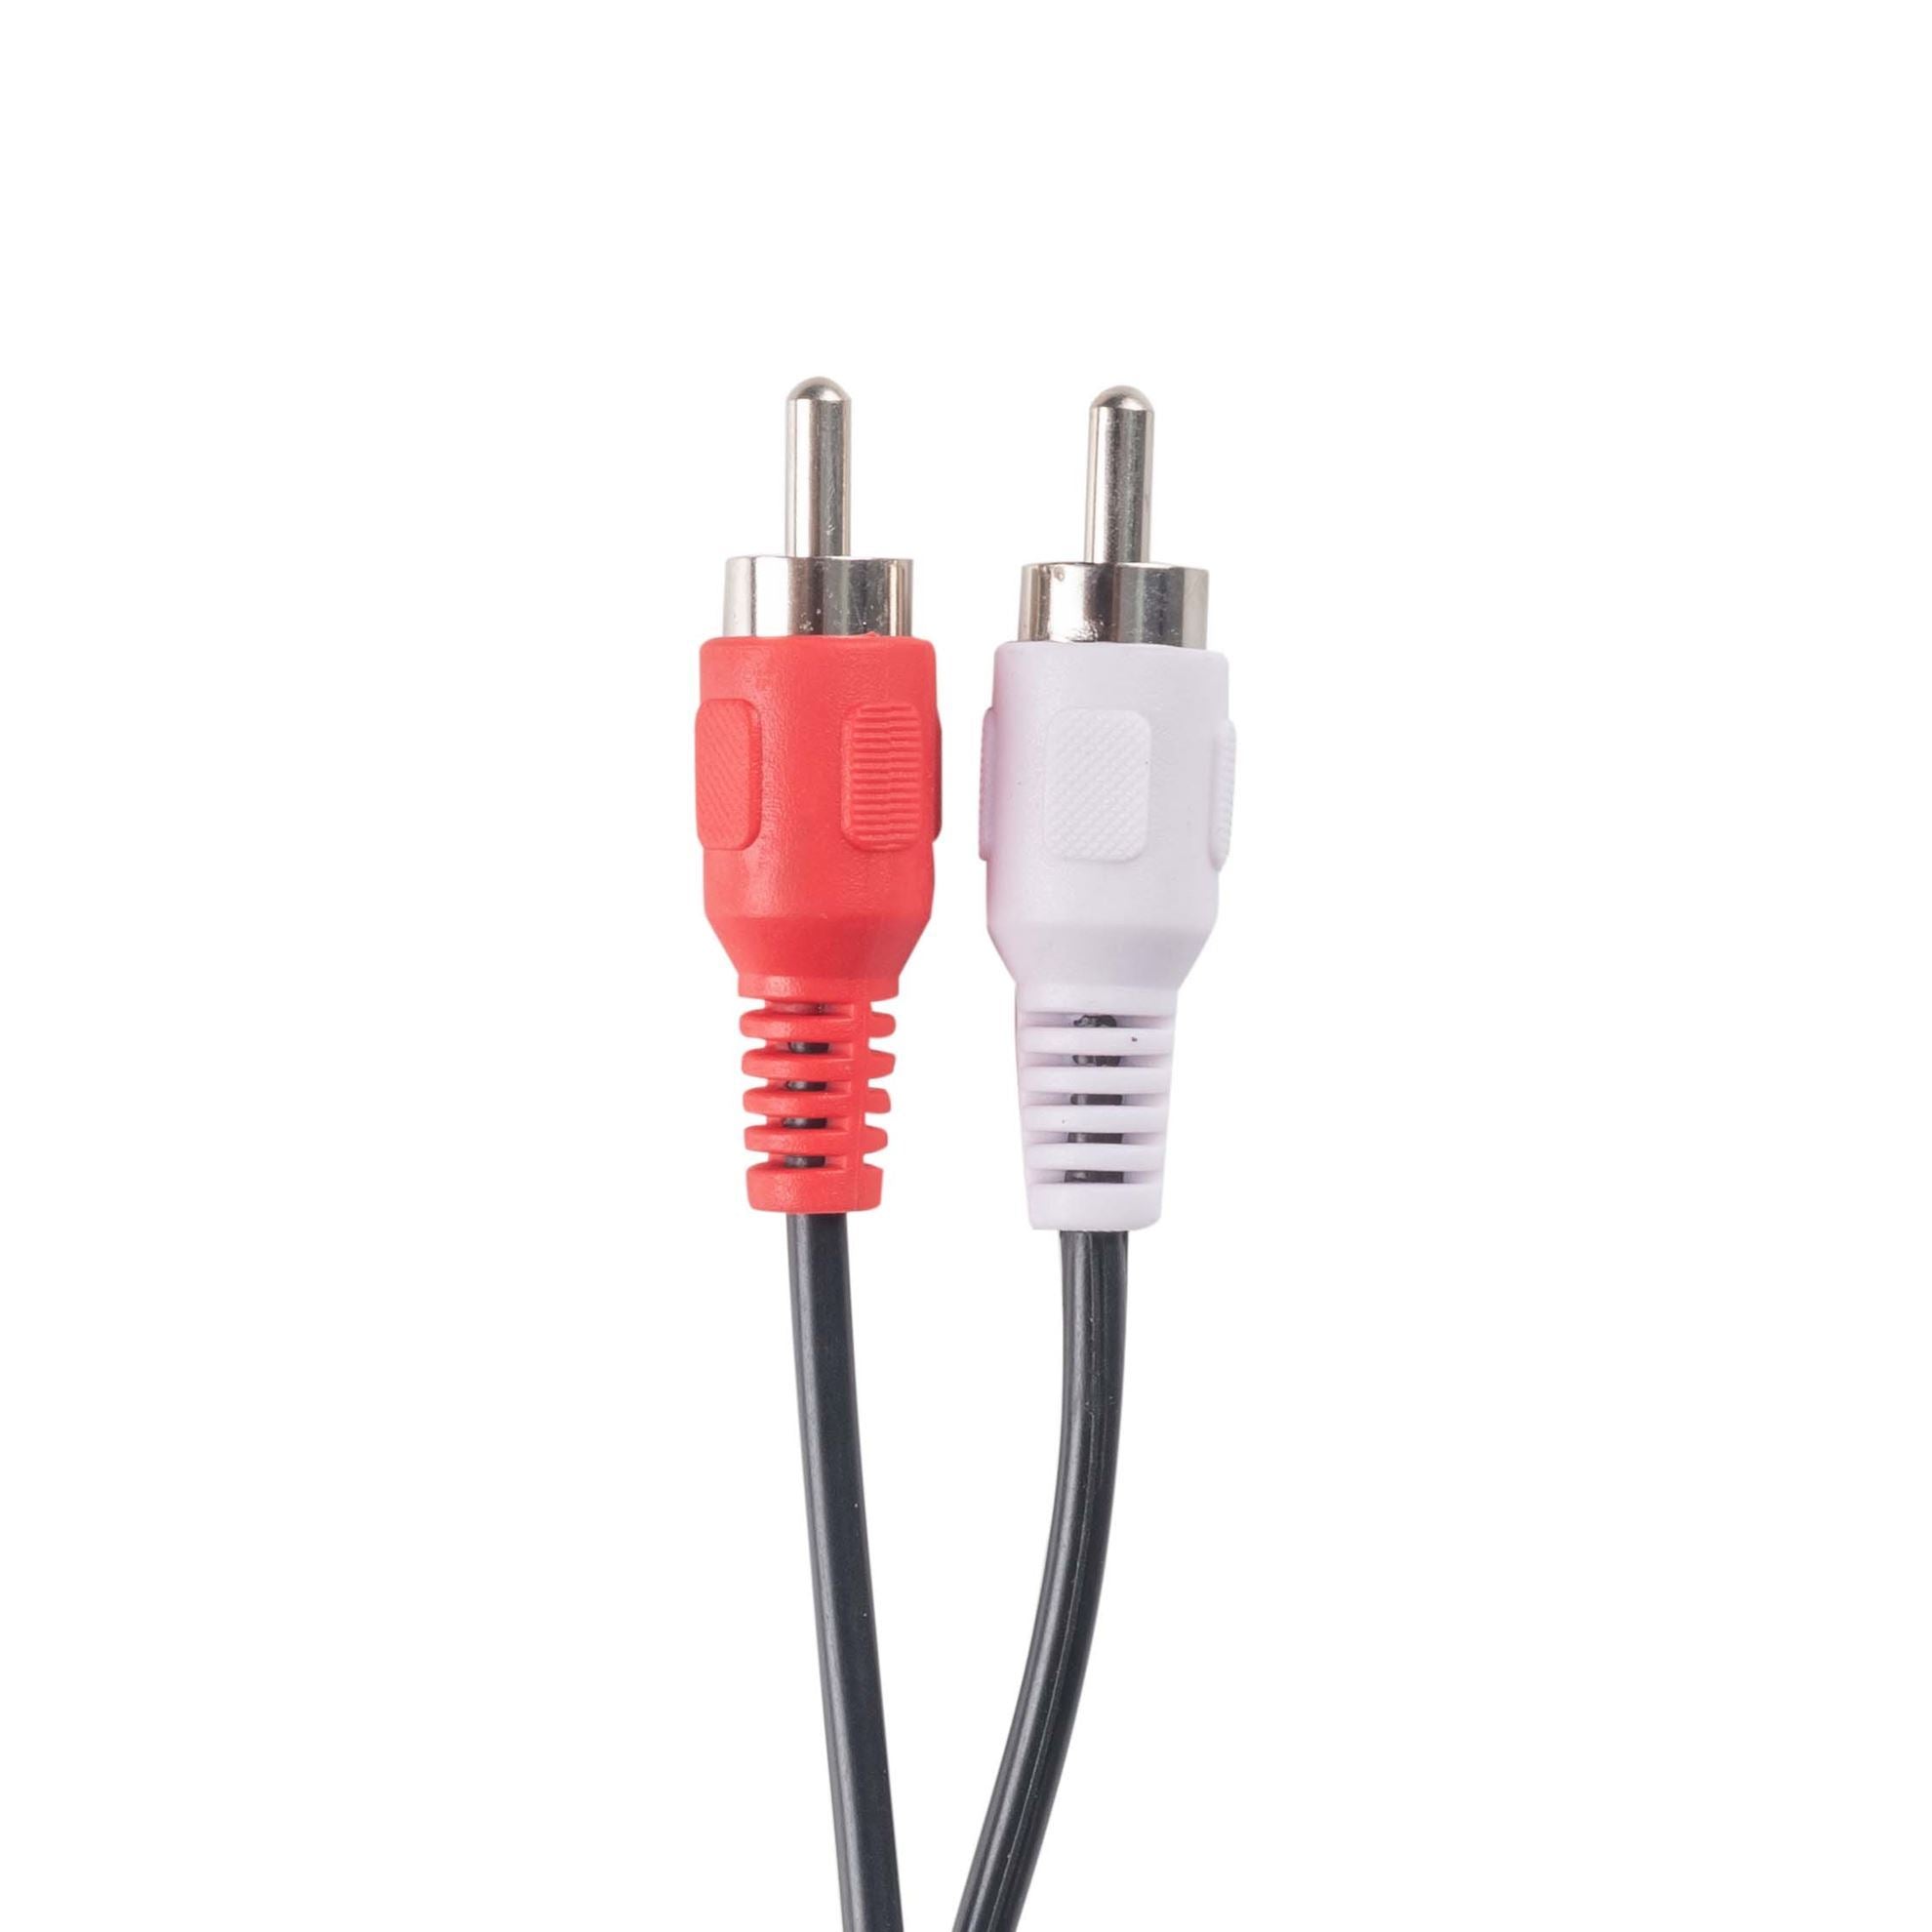 DYNAMIX_15m_RCA_Audio_Cable_2_RCA_to_2_RCA_Plugs,_Coloured_Red_&_White 388